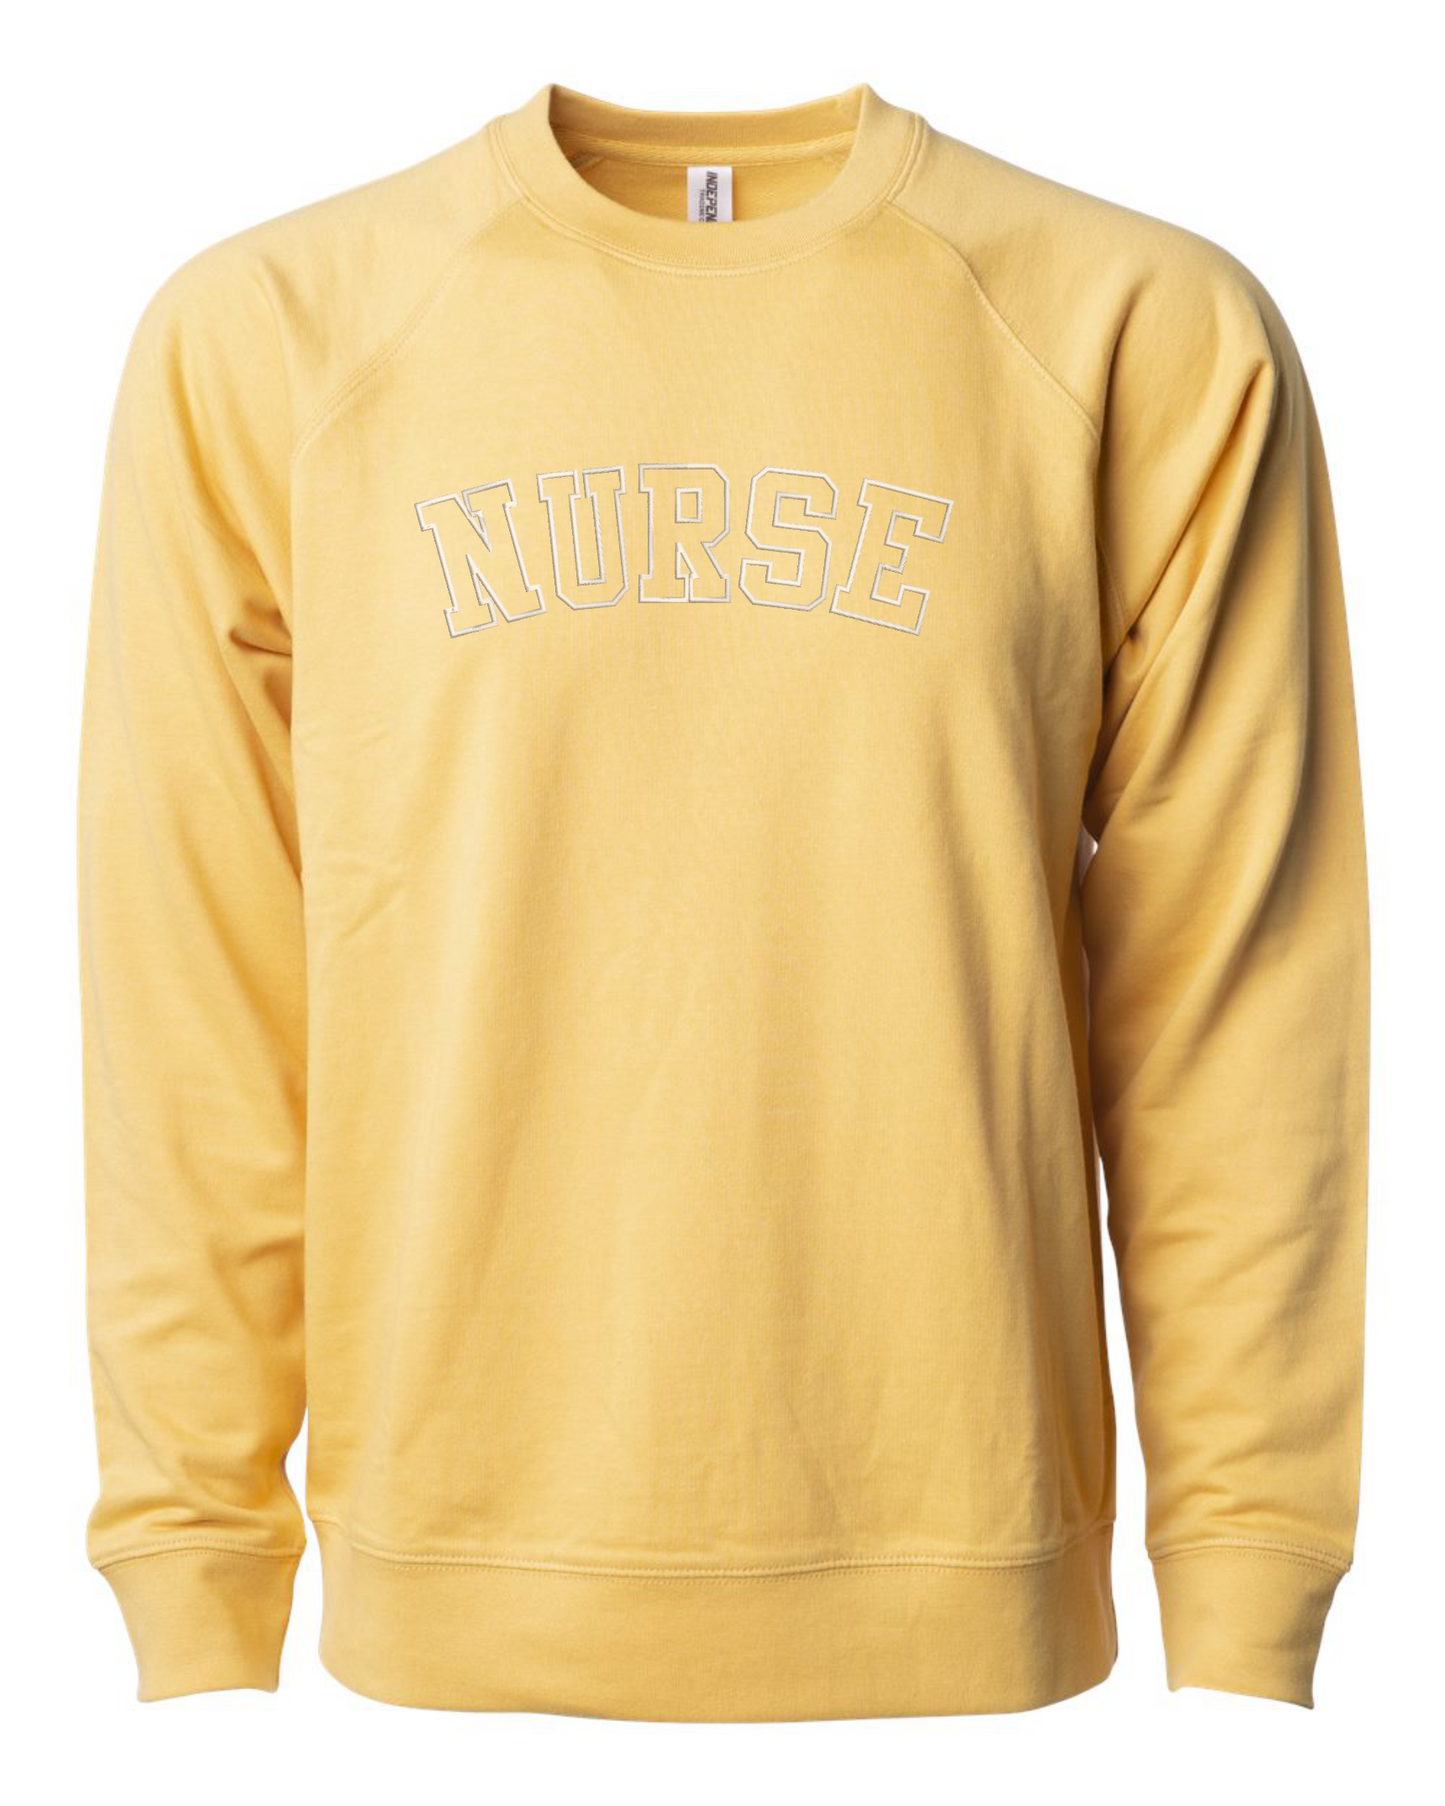 Harvest Gold Stylish and Comfortable Embroidered Nurse Crewneck: Perfect for Healthcare Professionals Active